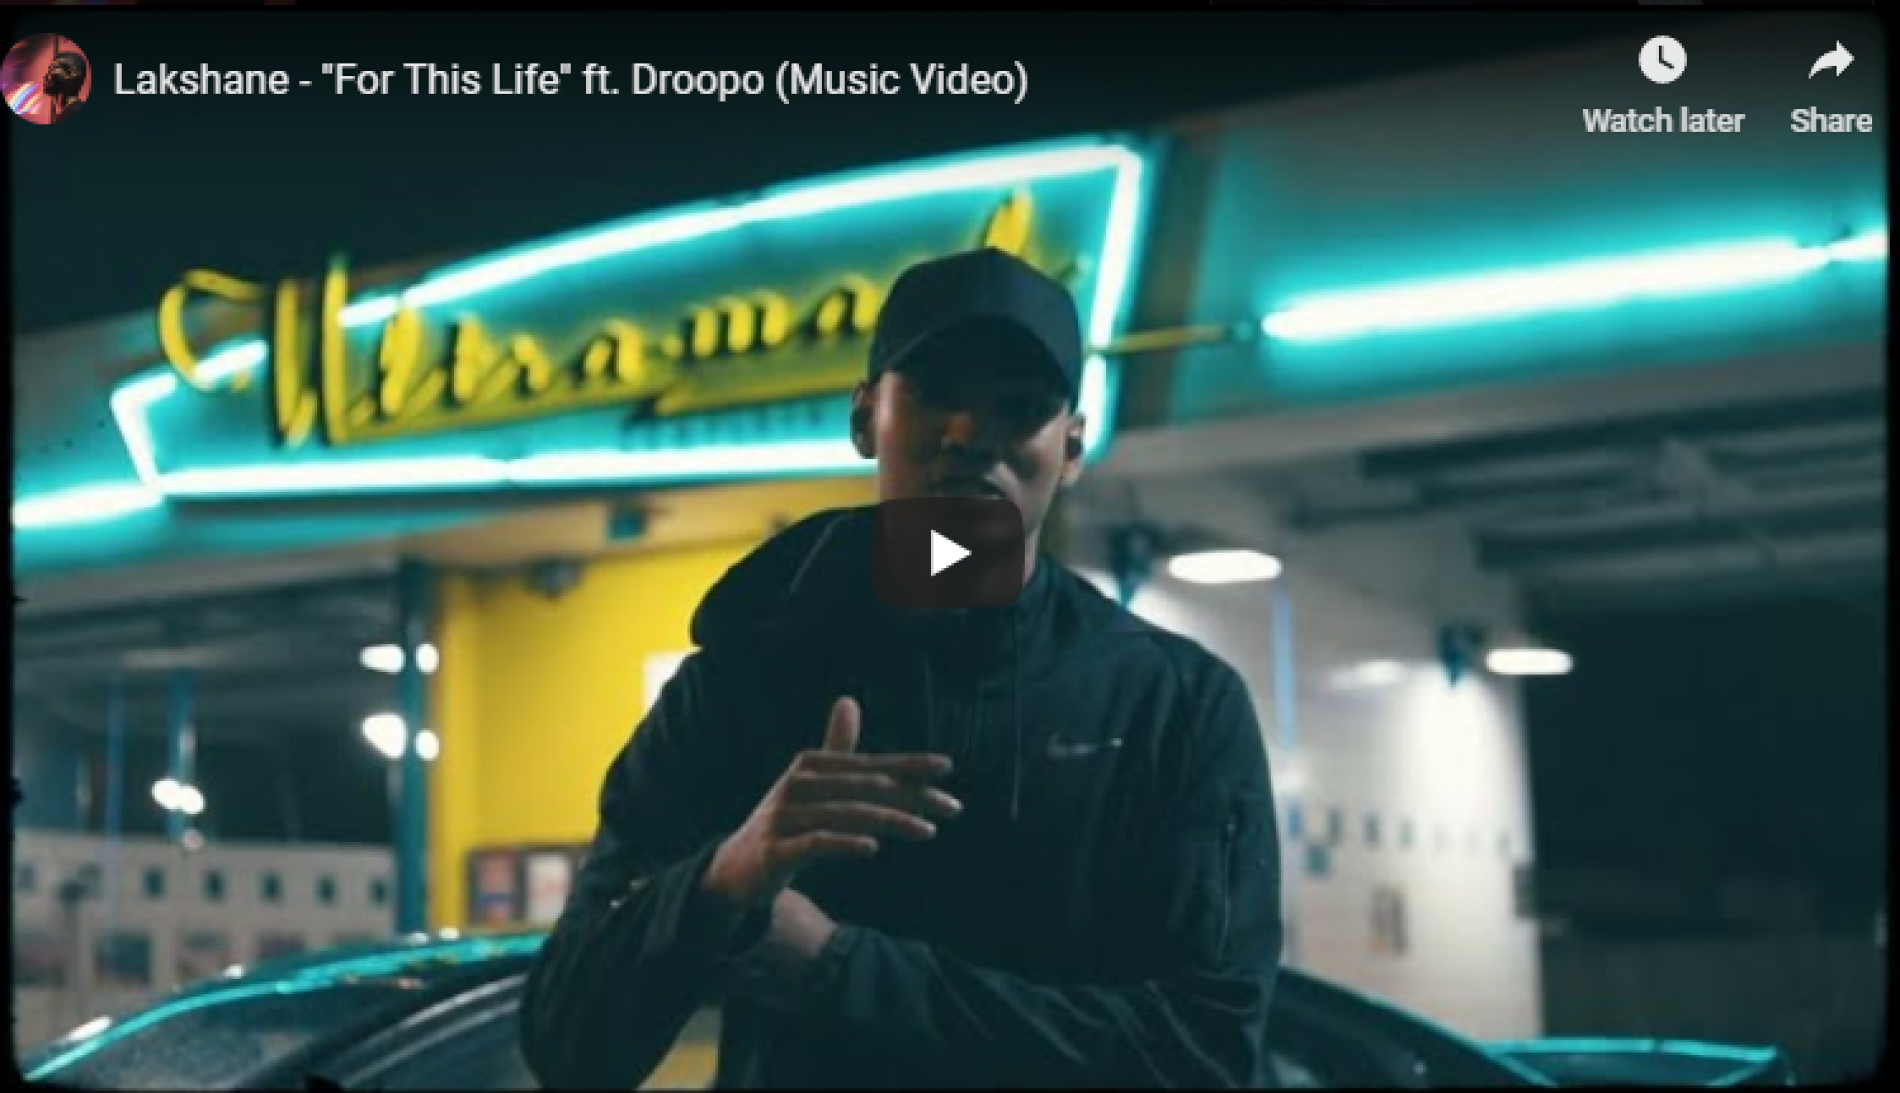 Lakshane – “For This Life” ft Droopo (Music Video)